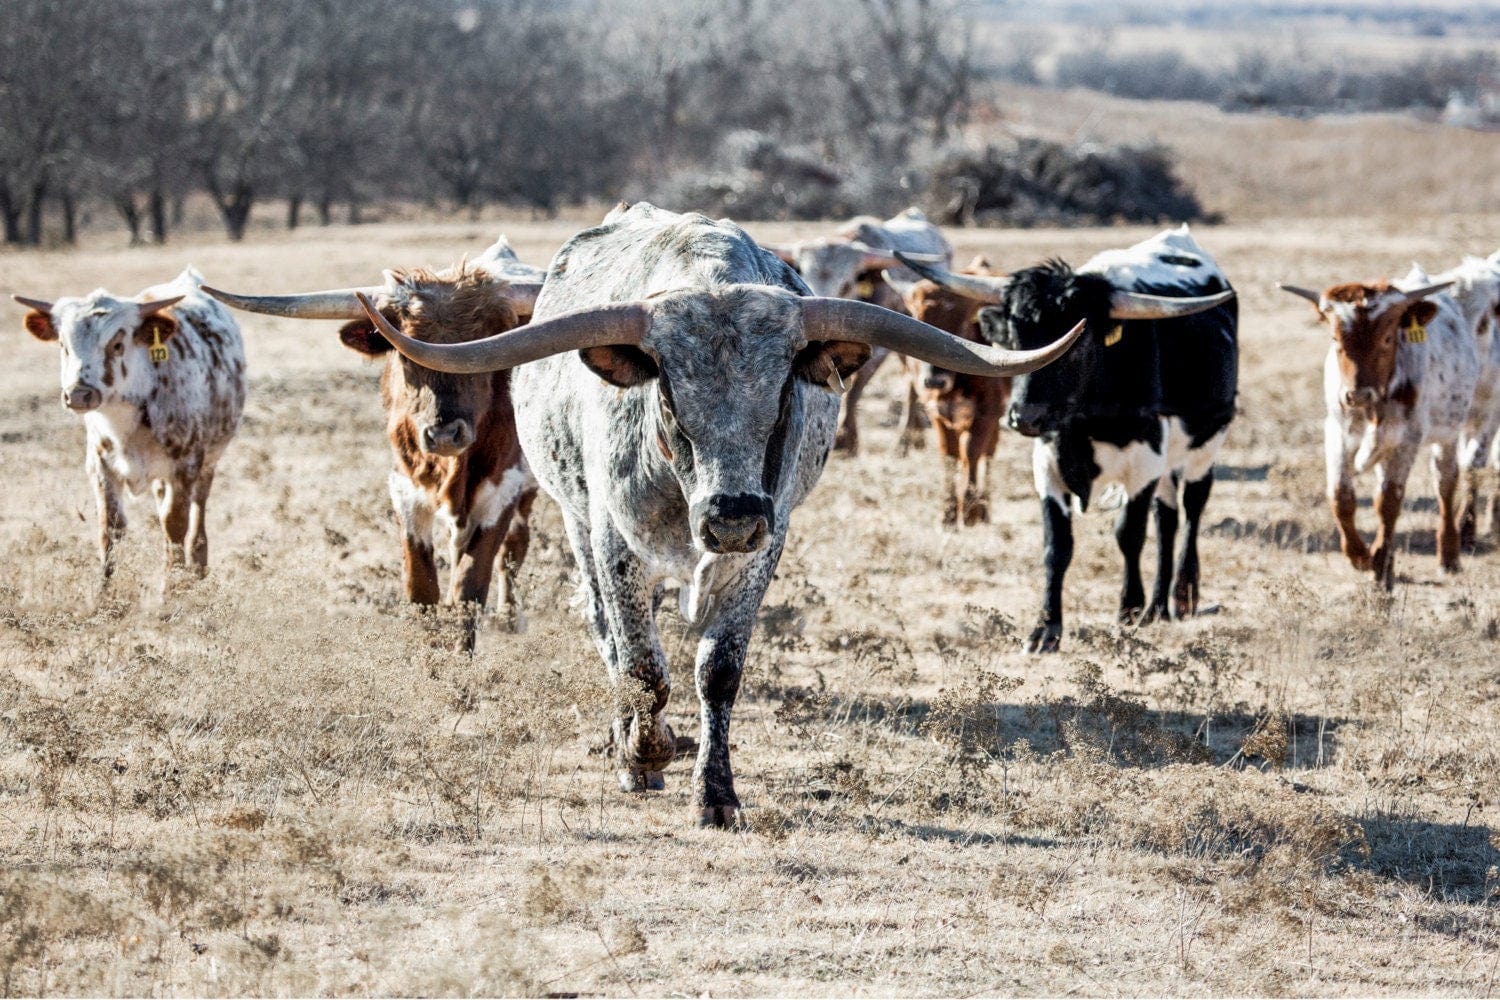 Texas Longhorn Bull Leading the Herd Paper Photo Print / 12 x 18 Inches Wall Art Teri James Photography